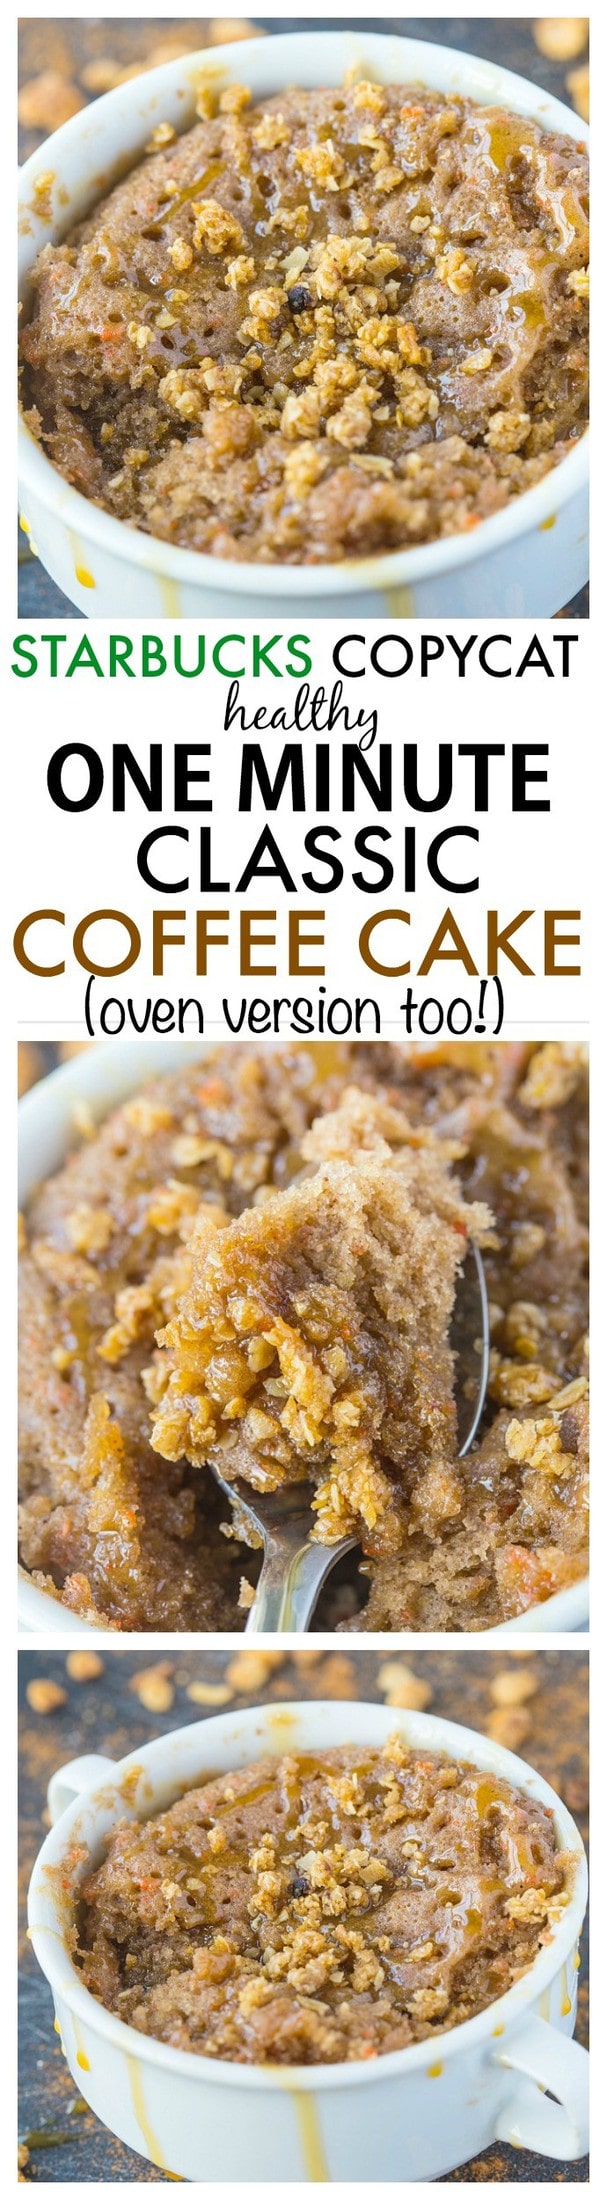 Healthy 1 Minute Classic Coffee Cake- Inspired by Starbucks, this healthy cake recipe is moist, fluffy and SO delicious- There's no oil, butter or added sugar AND it only takes one minute- Oven option too! {vegan, gluten free, paleo}